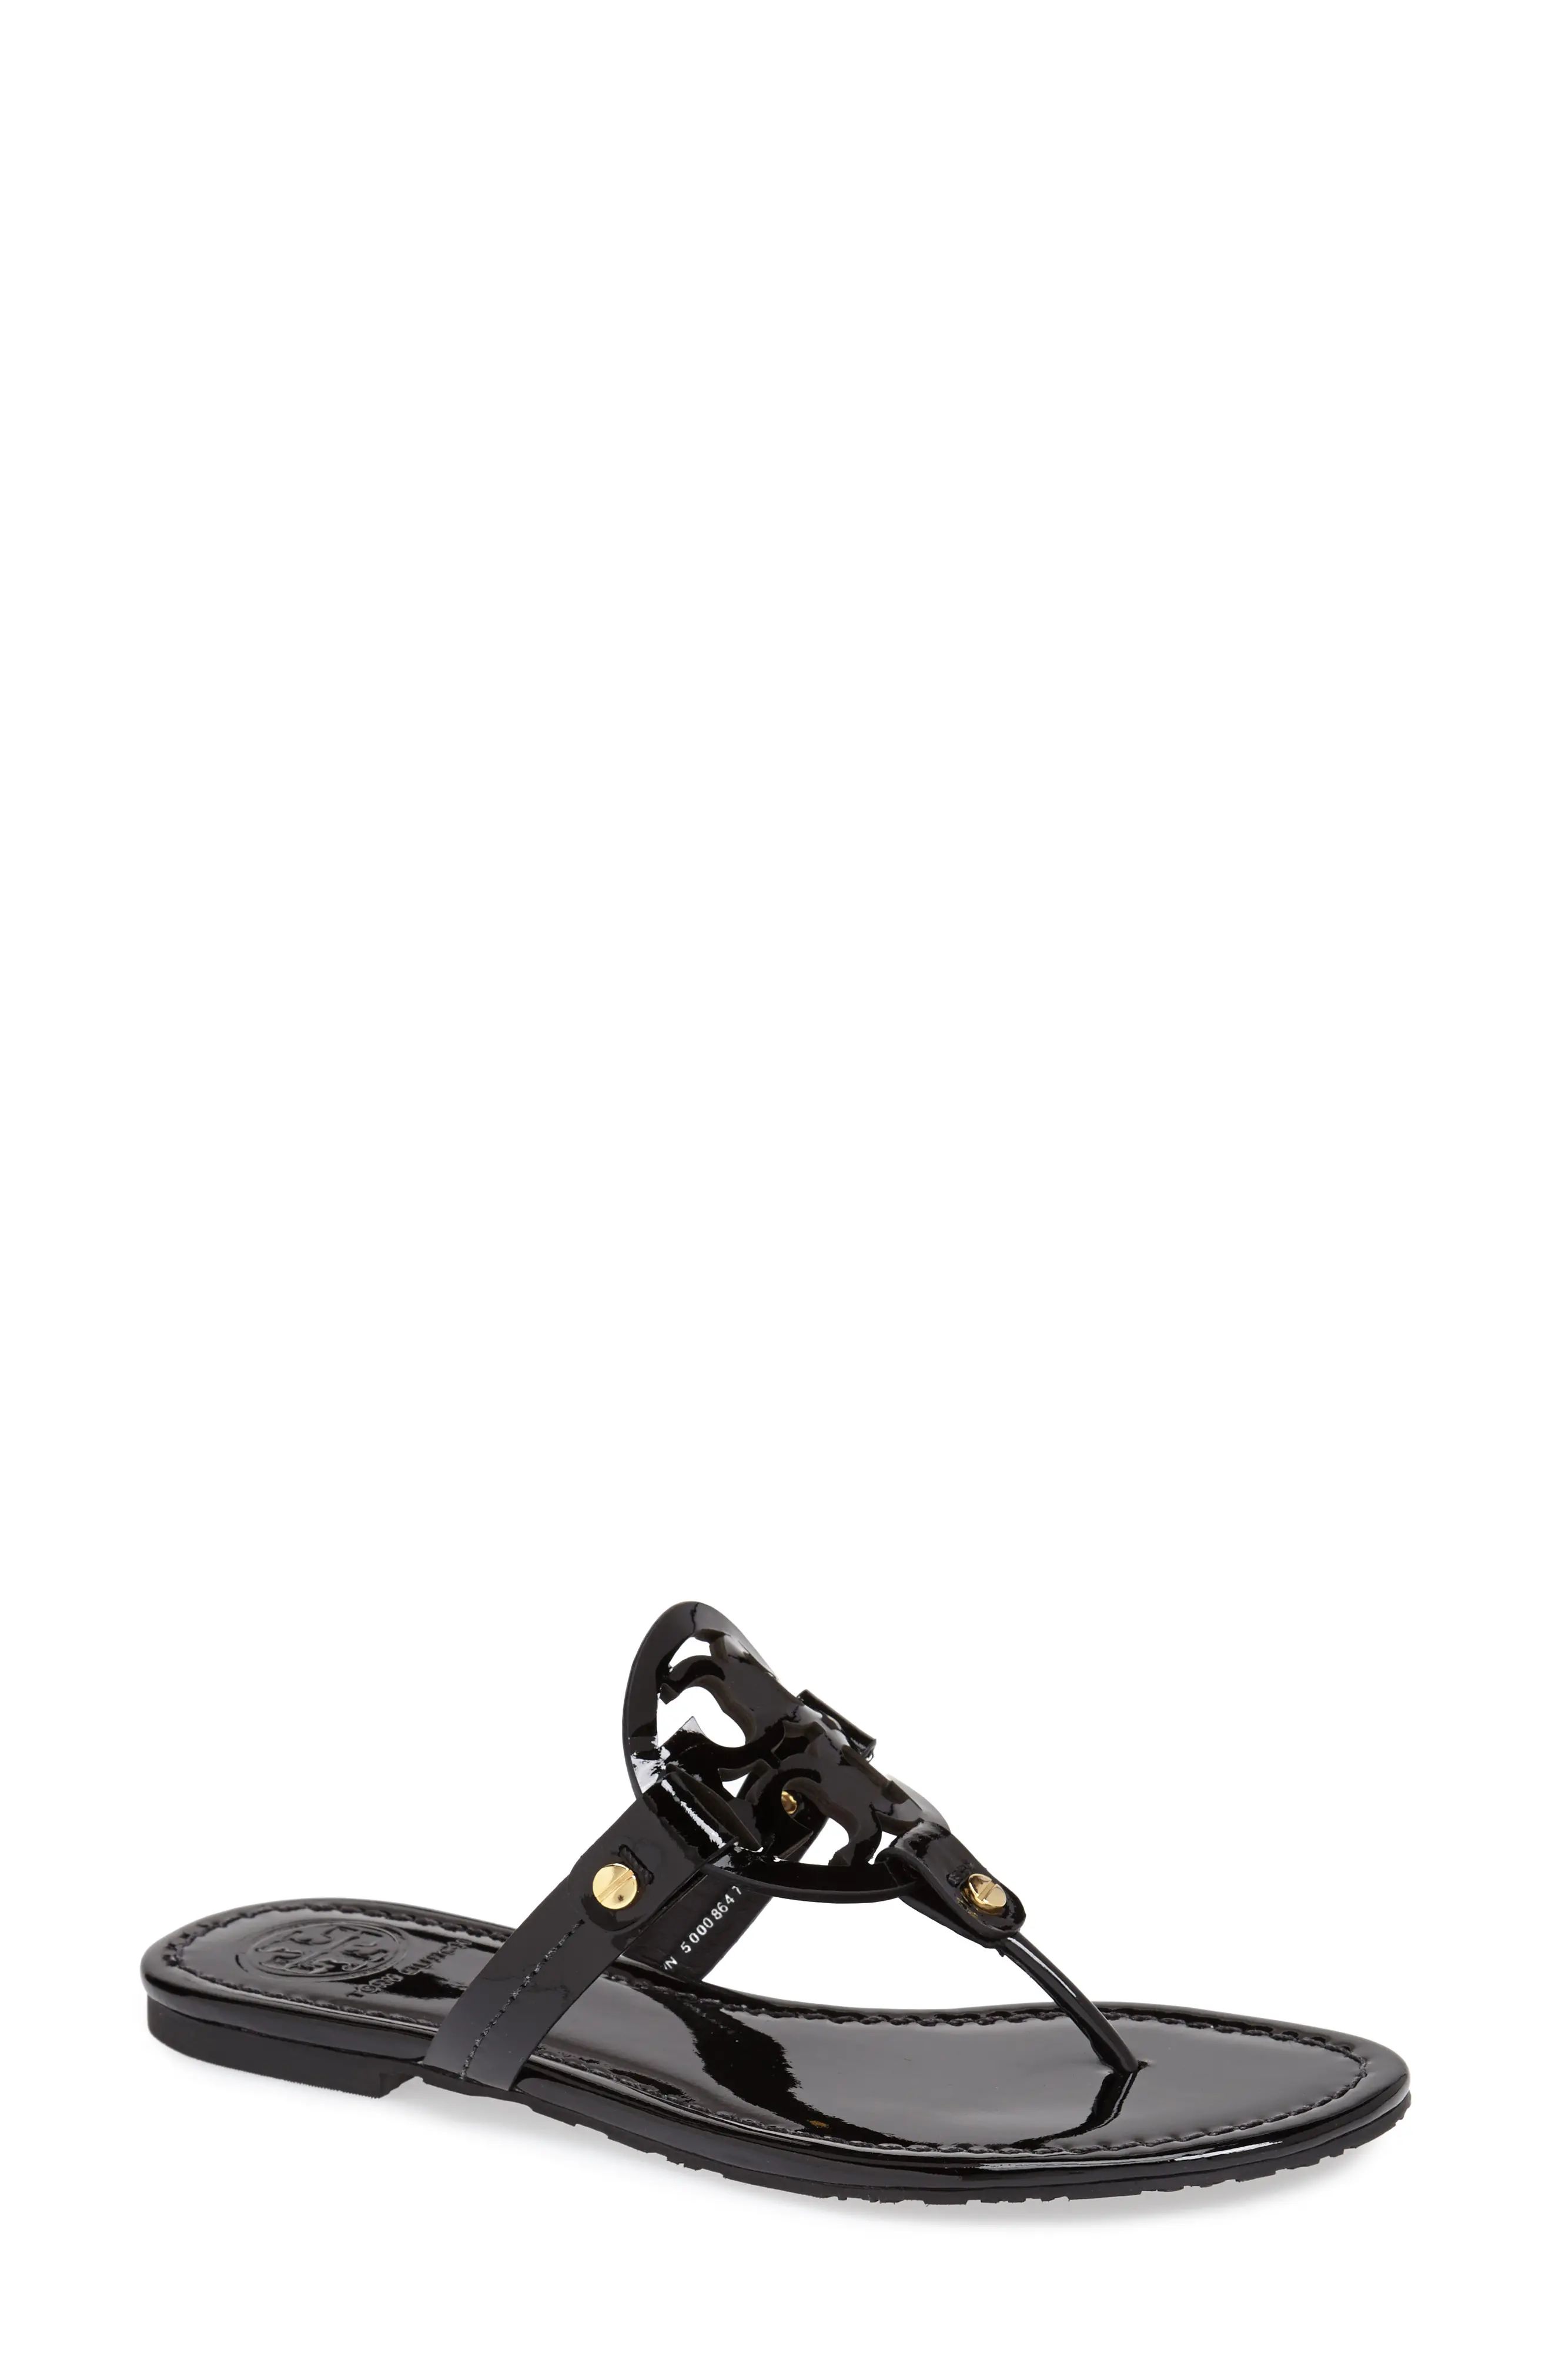 Tory Burch Miller Leather Sandal in Black Patent at Nordstrom, Size 8.5 | Nordstrom